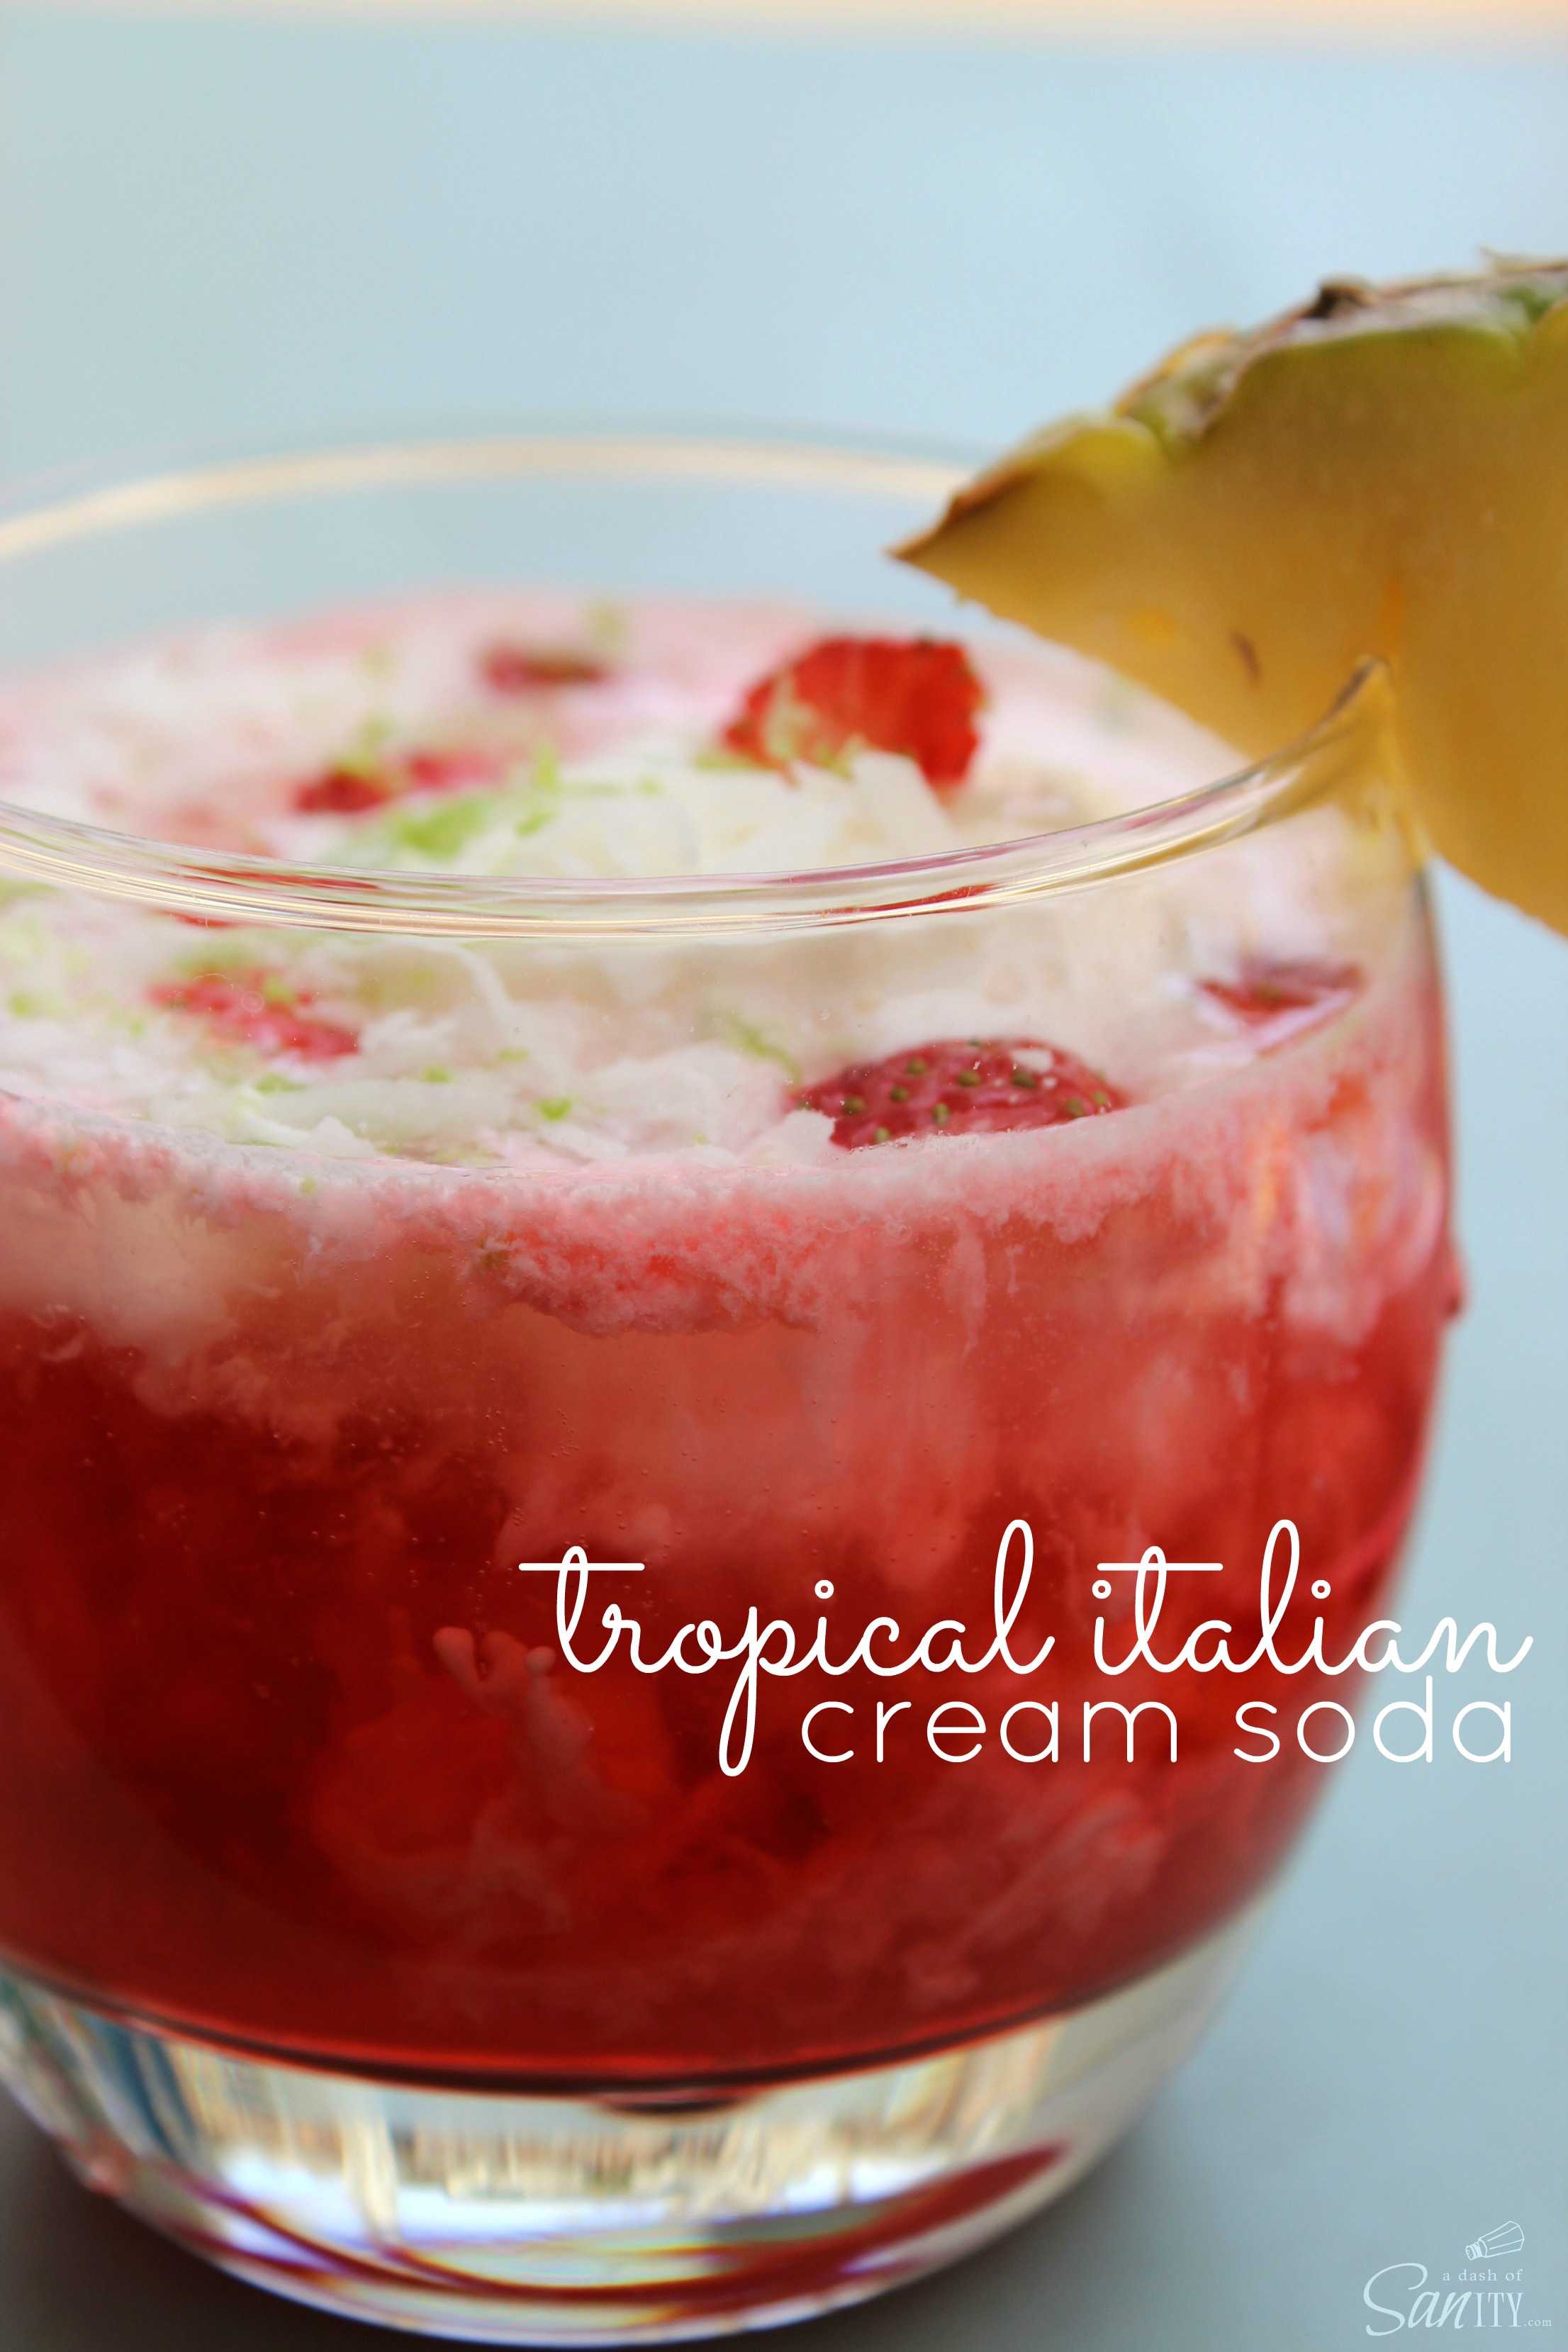 Tropical Italian Cream Soda has all the elements to a beach side drink with pineapple, coconut, cherry, a touch of cream and most importantly carbonation.